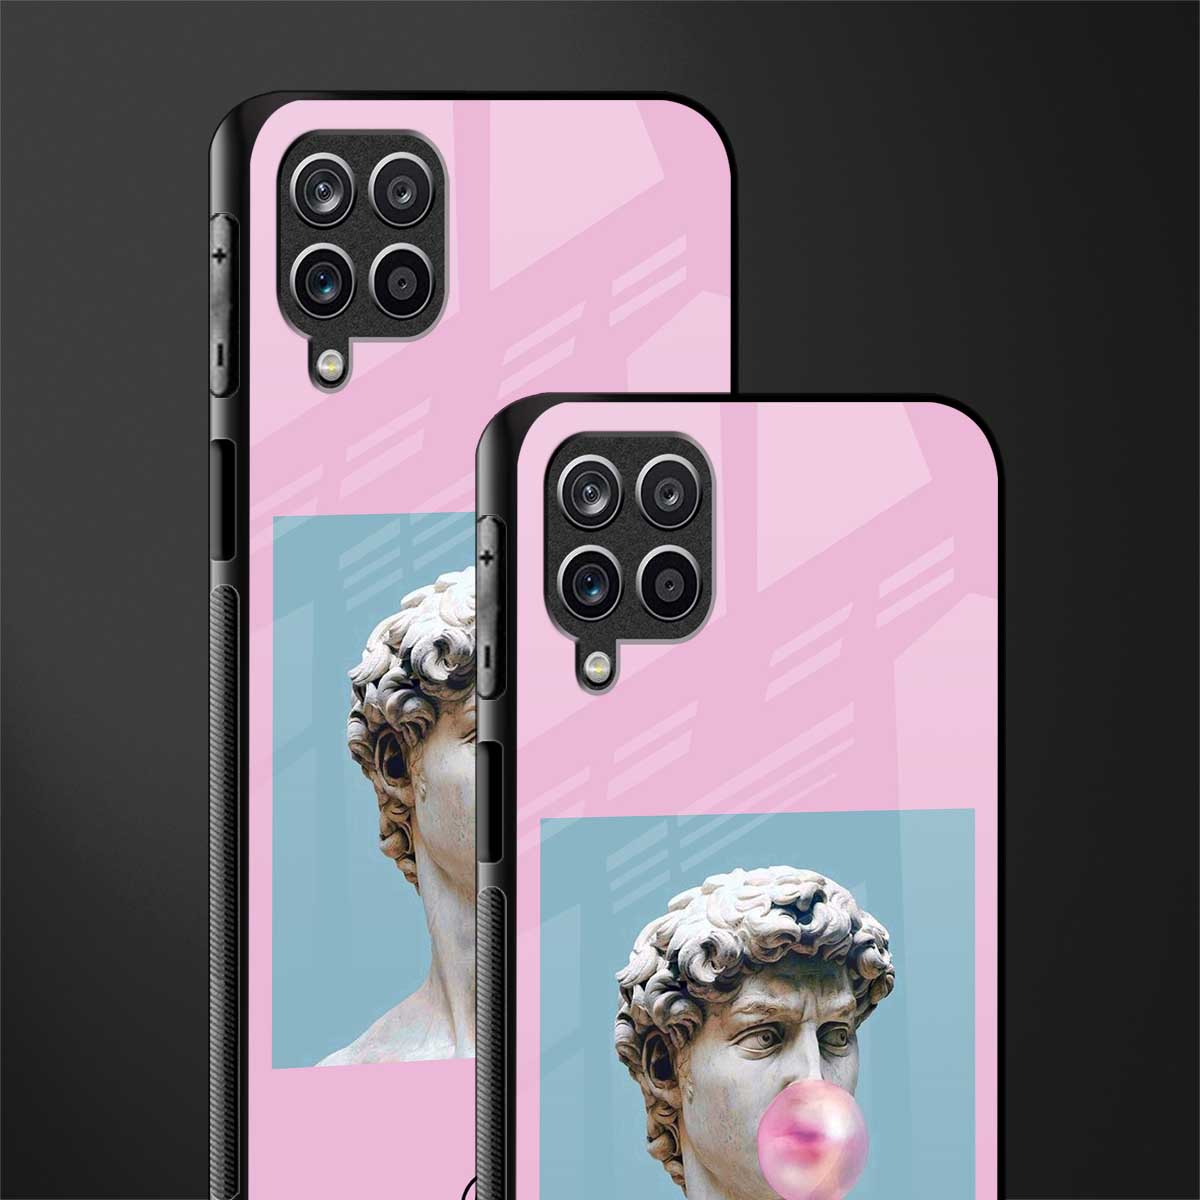 dope david michelangelo back phone cover | glass case for samsung galaxy a22 4g